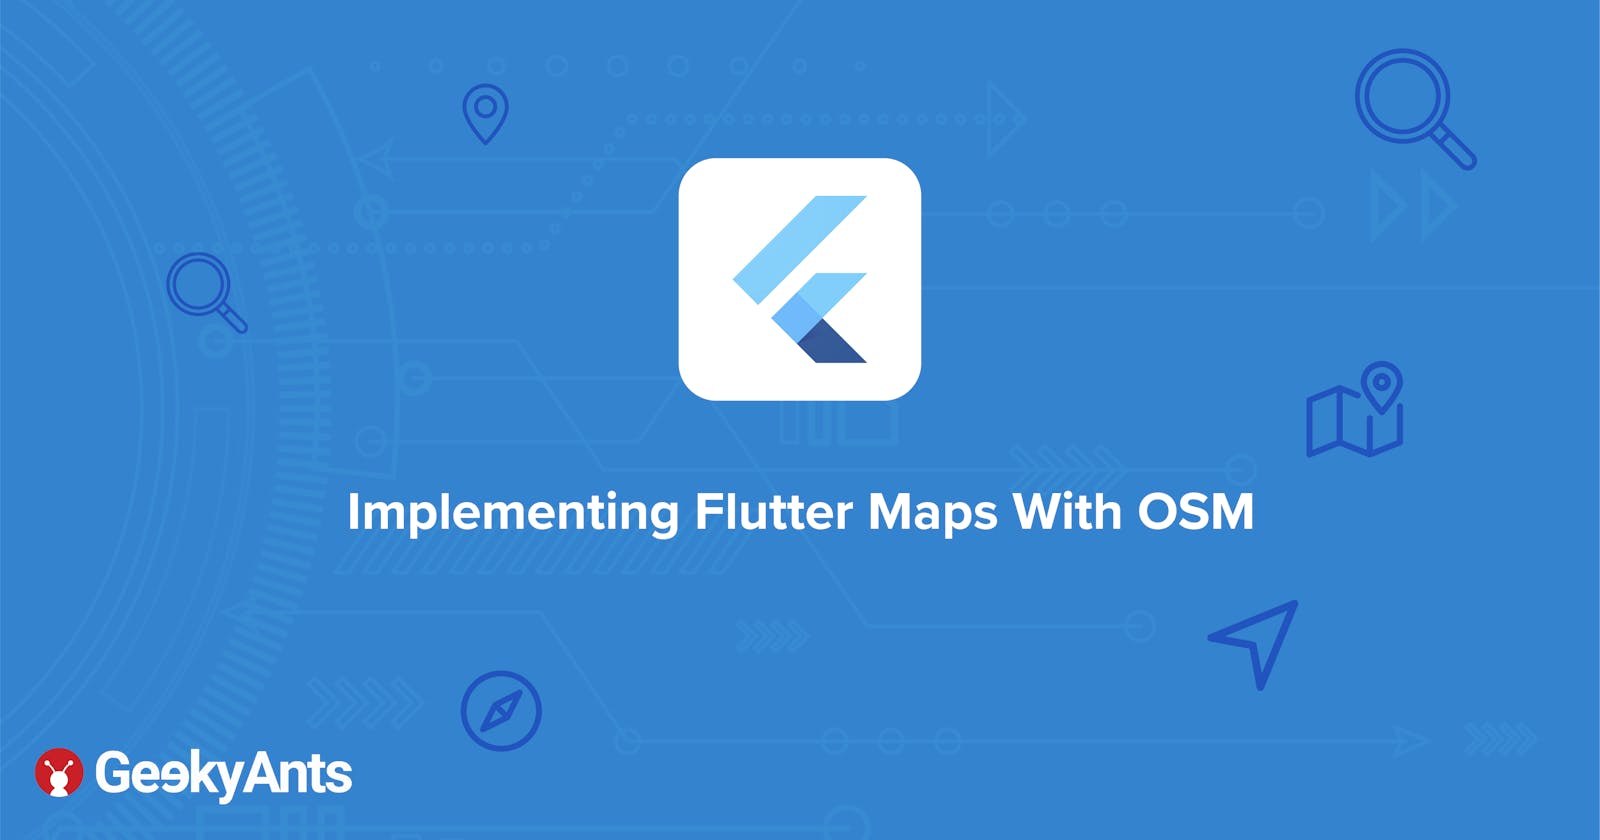 Implementing Flutter Maps With OSM